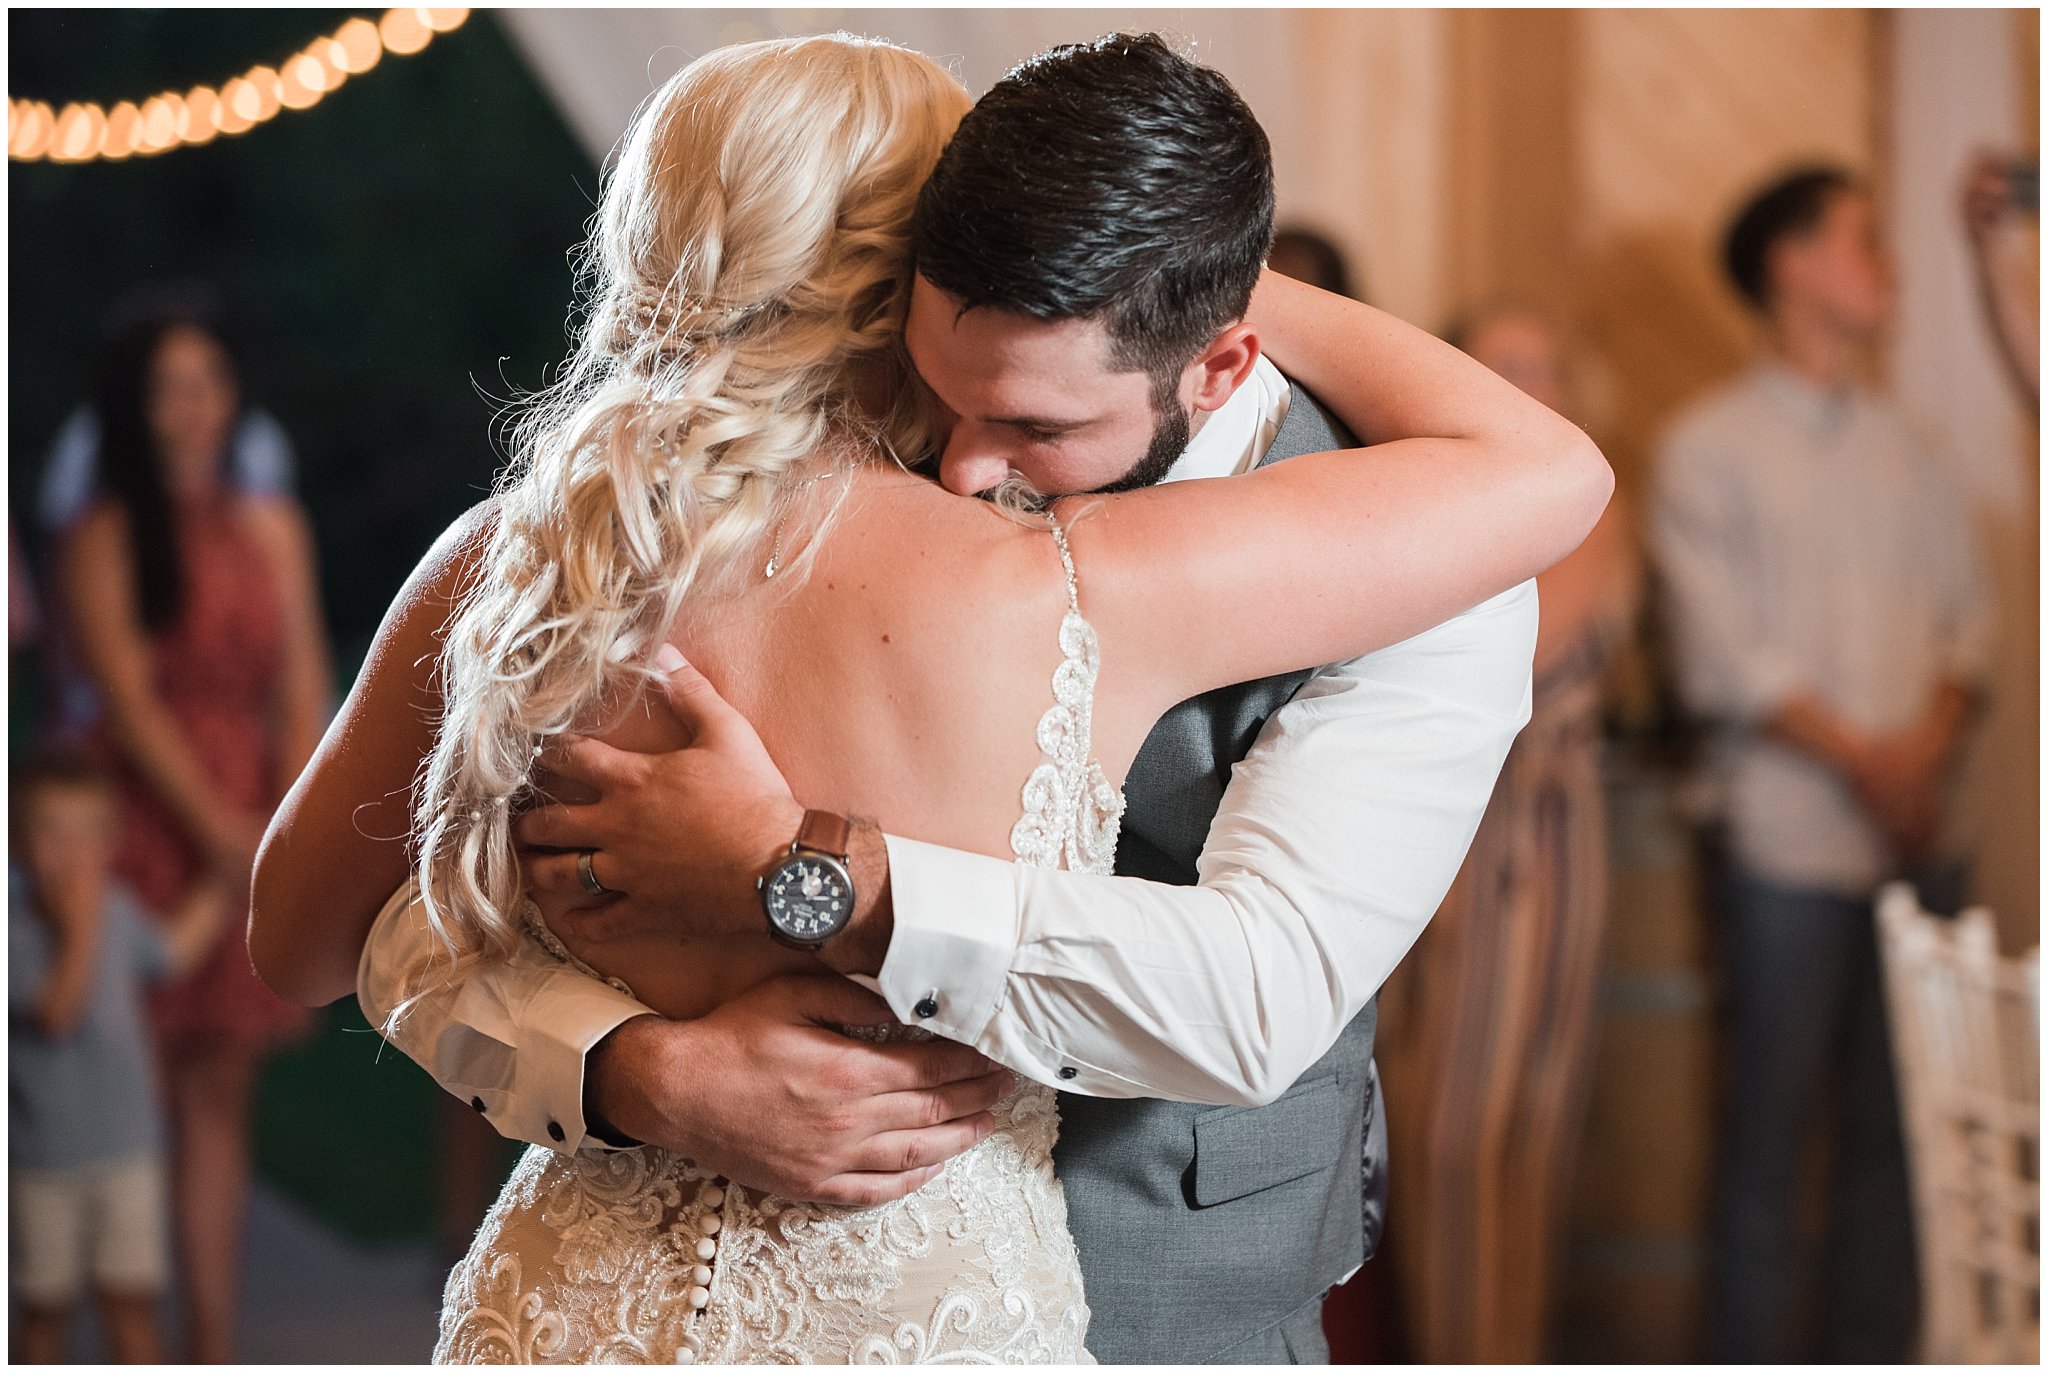 Bride and groom first dance in barn with lace dress and cathedral veil and gray suit with blue floral tie | Dusty Blue and Rose Summer Wedding at Oak Hills Utah | Jessie and Dallin Photography